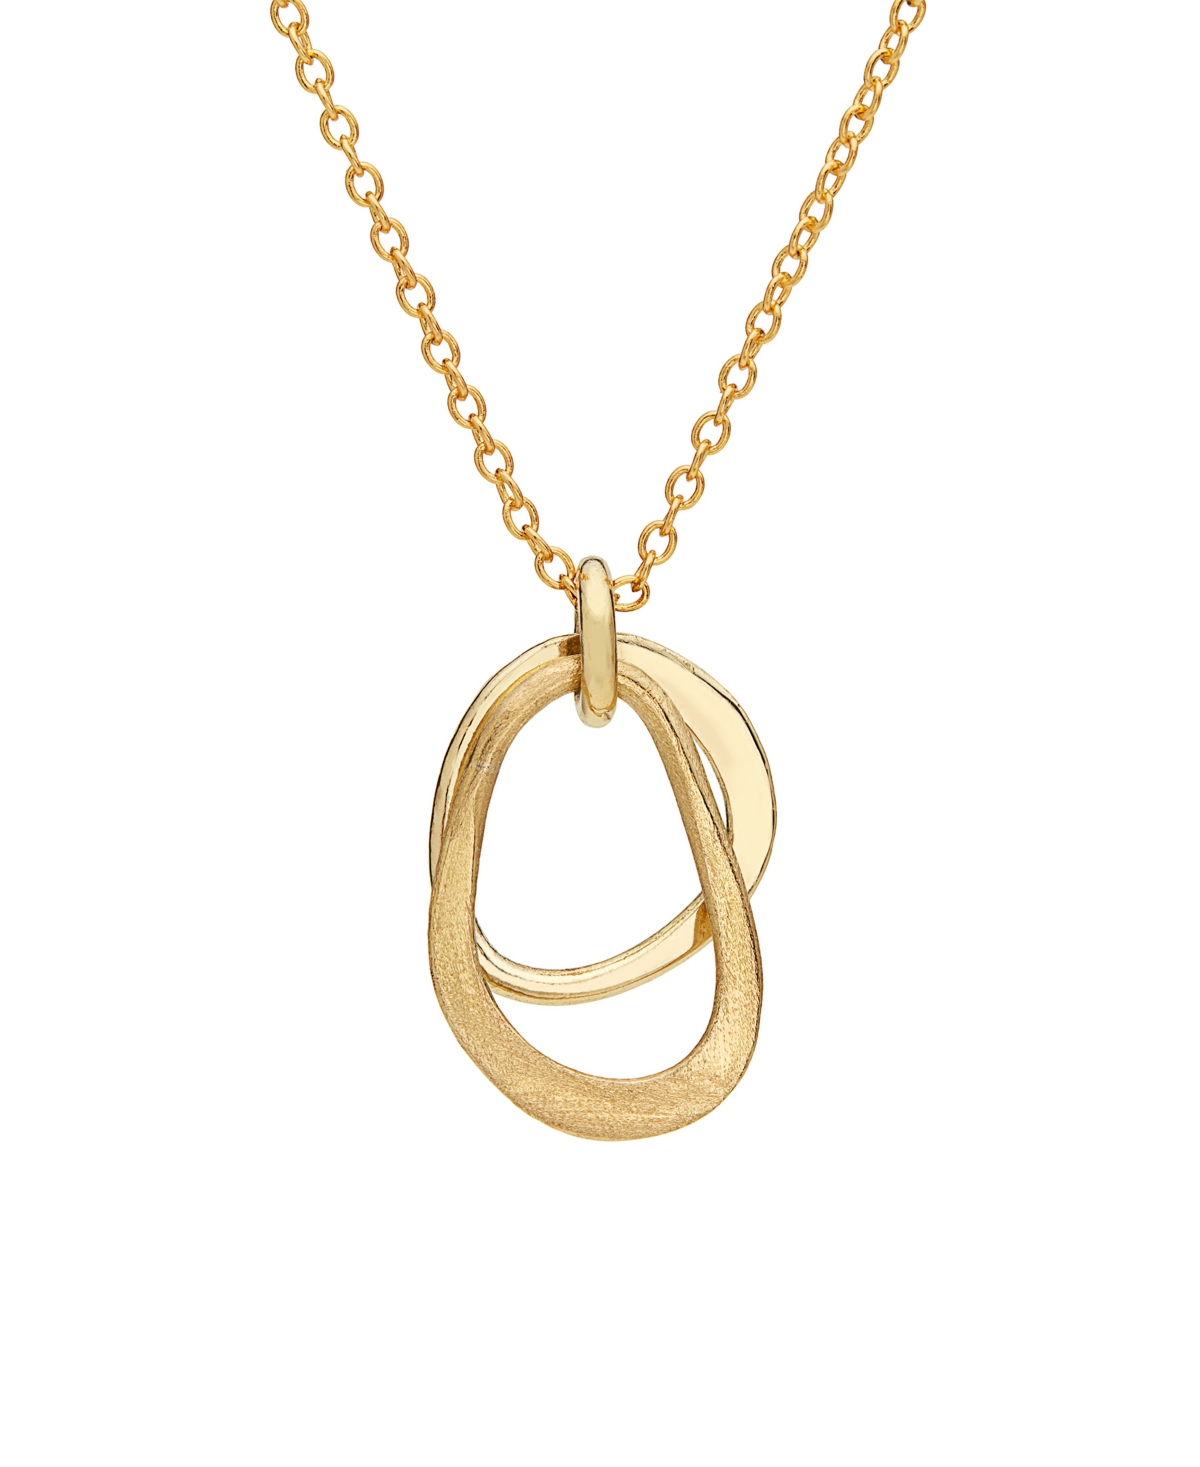 Soko 24k Gold-plated Makali Delicate Necklace